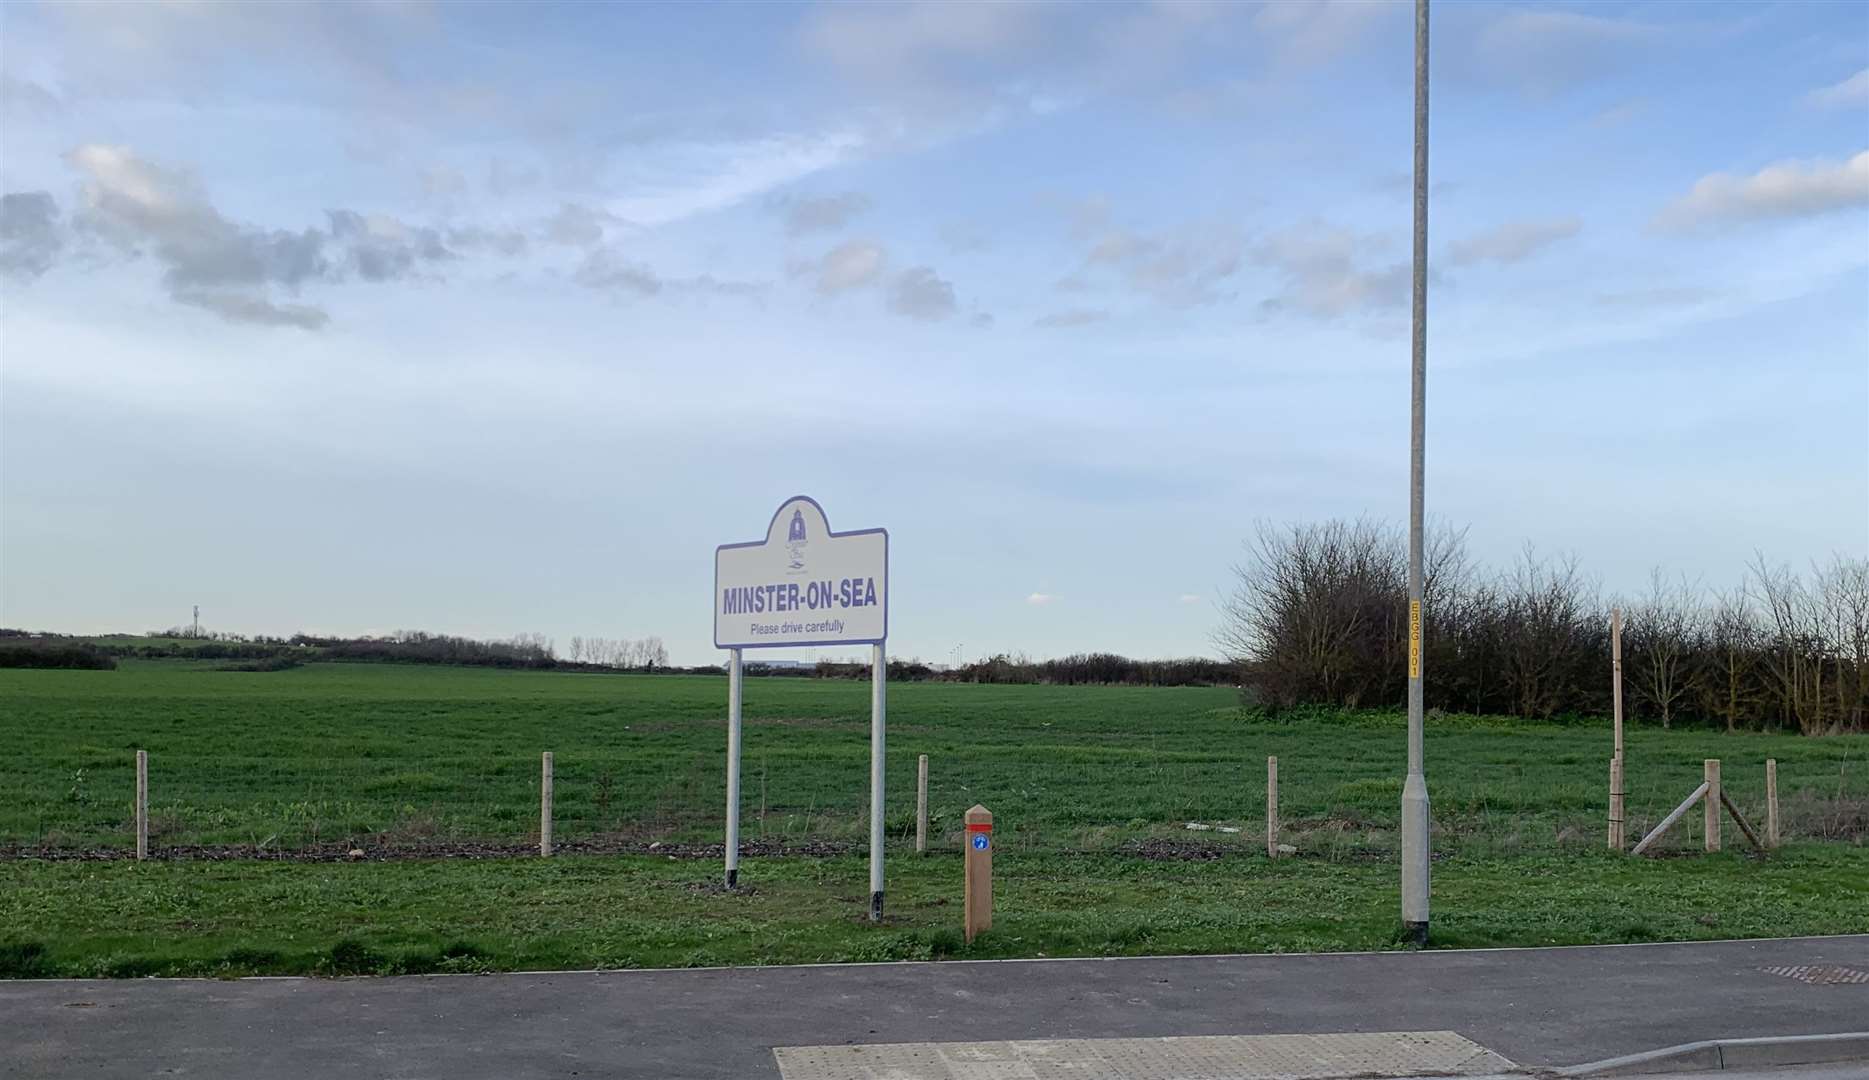 The site at Barton Hill Drive, Minster, Sheppey